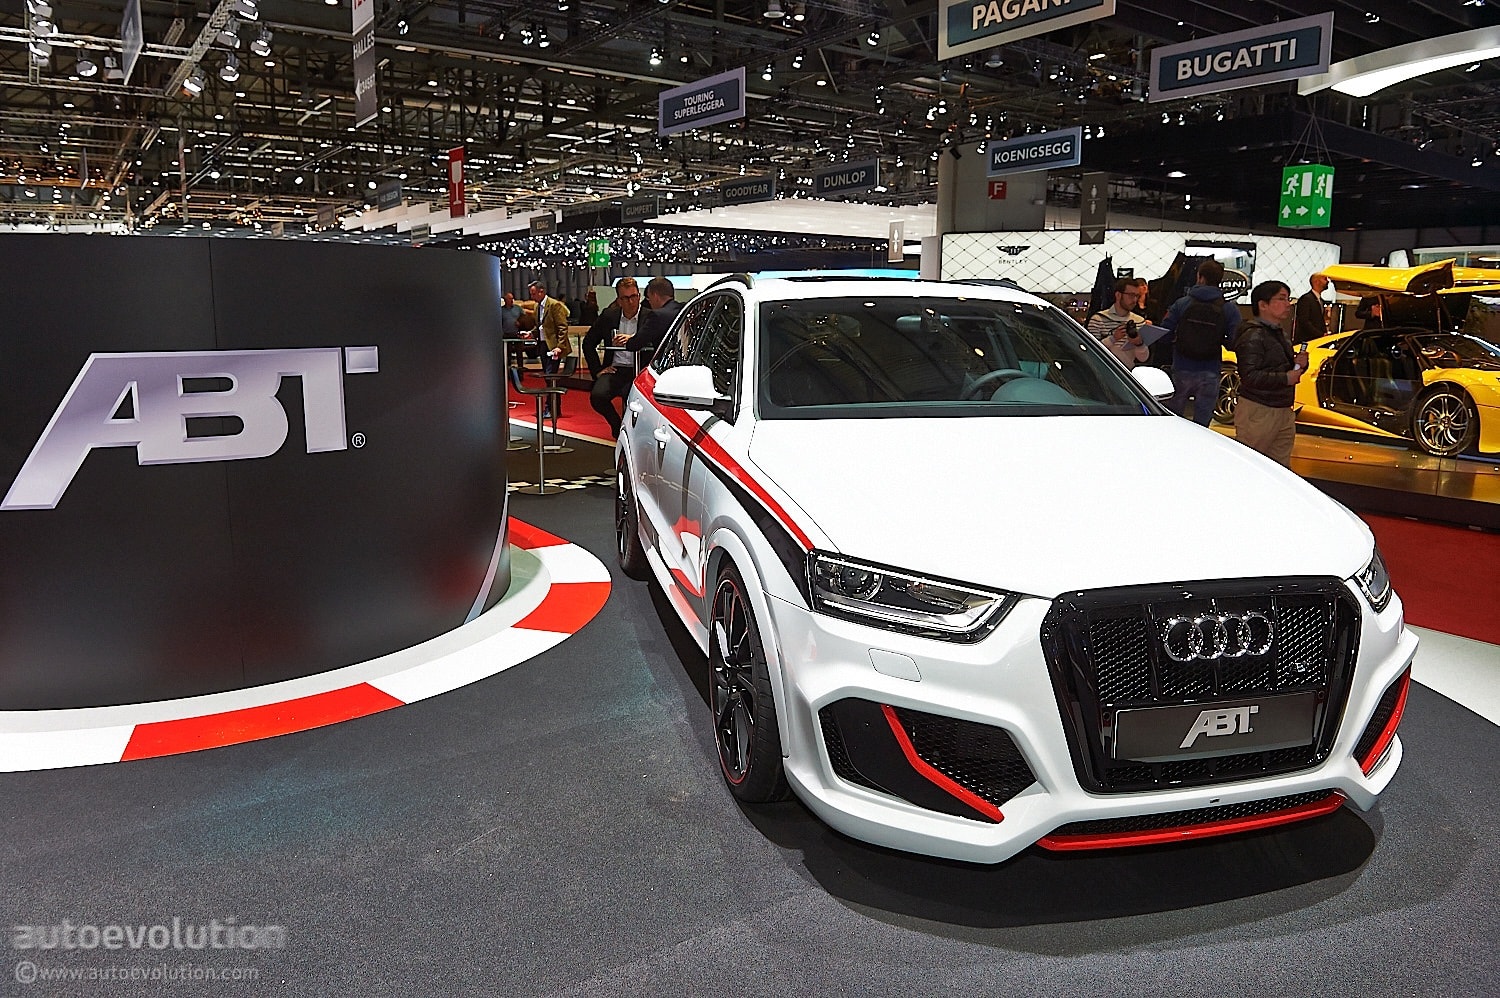 https://s1.cdn.autoevolution.com/images/news/abt-puts-power-back-into-25-tfsi-with-audi-rs-q3-tuning-project-live-photos-78052_1.jpg